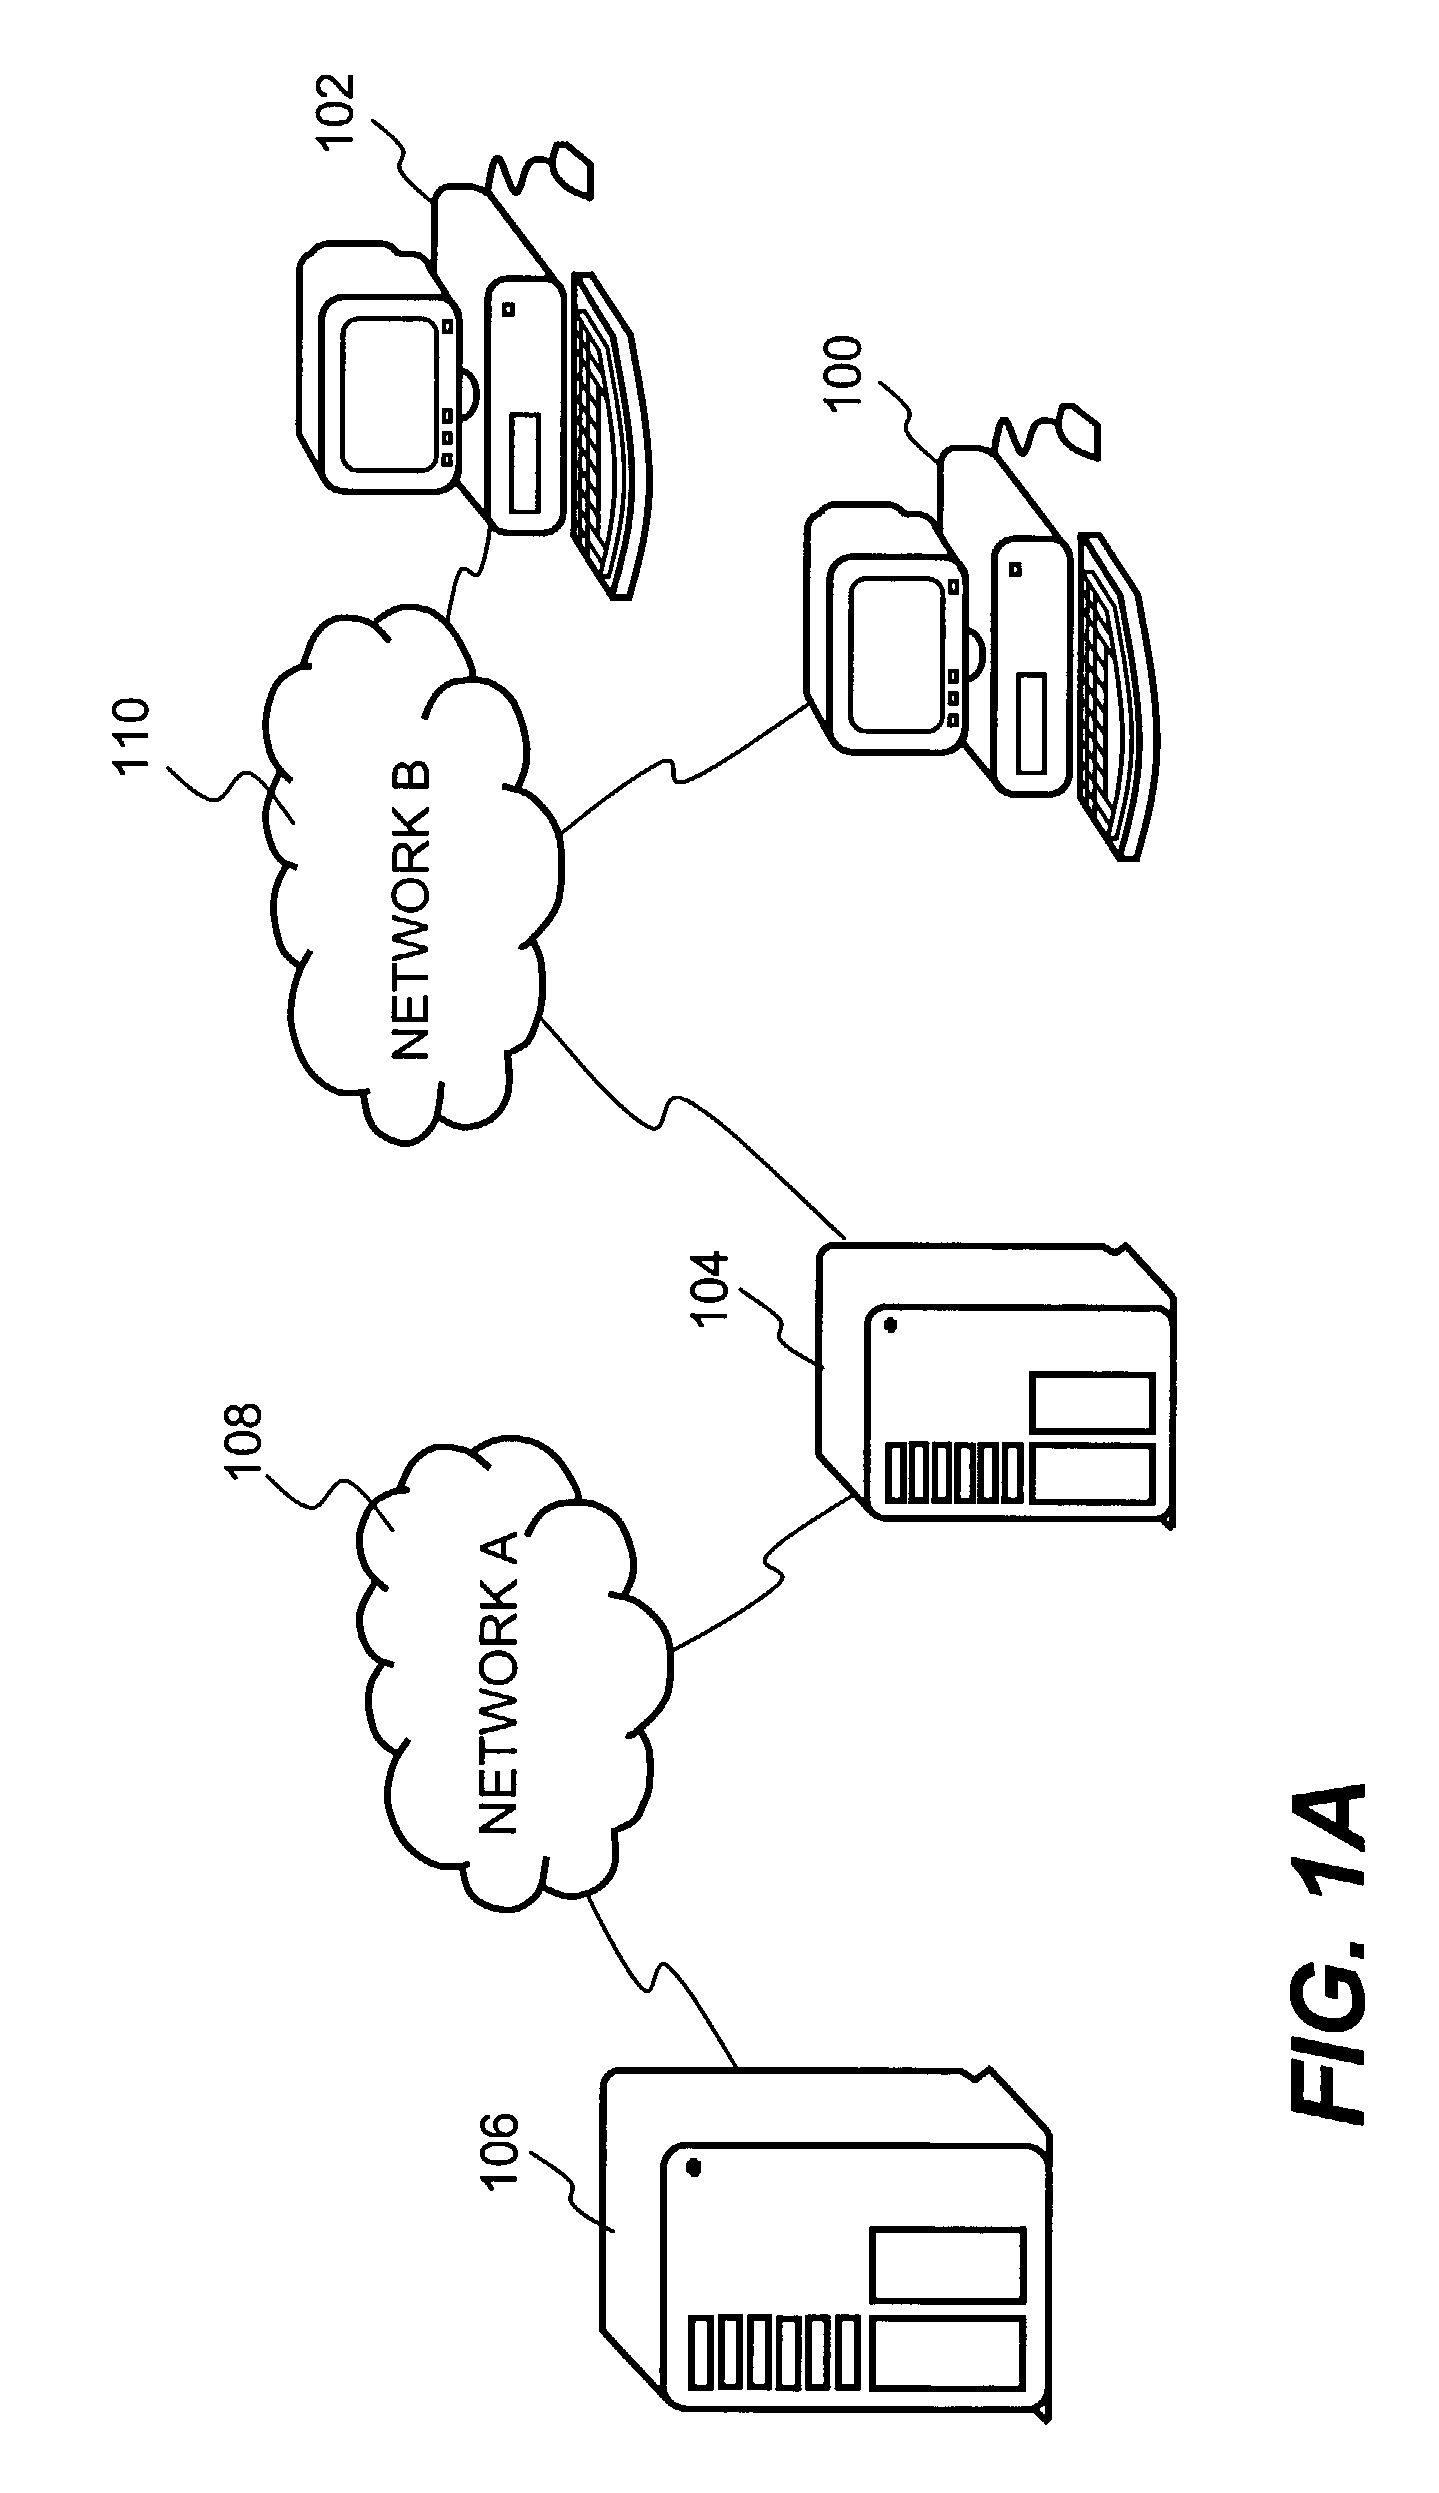 Method and system for implementing changes to security policies in a distributed security system